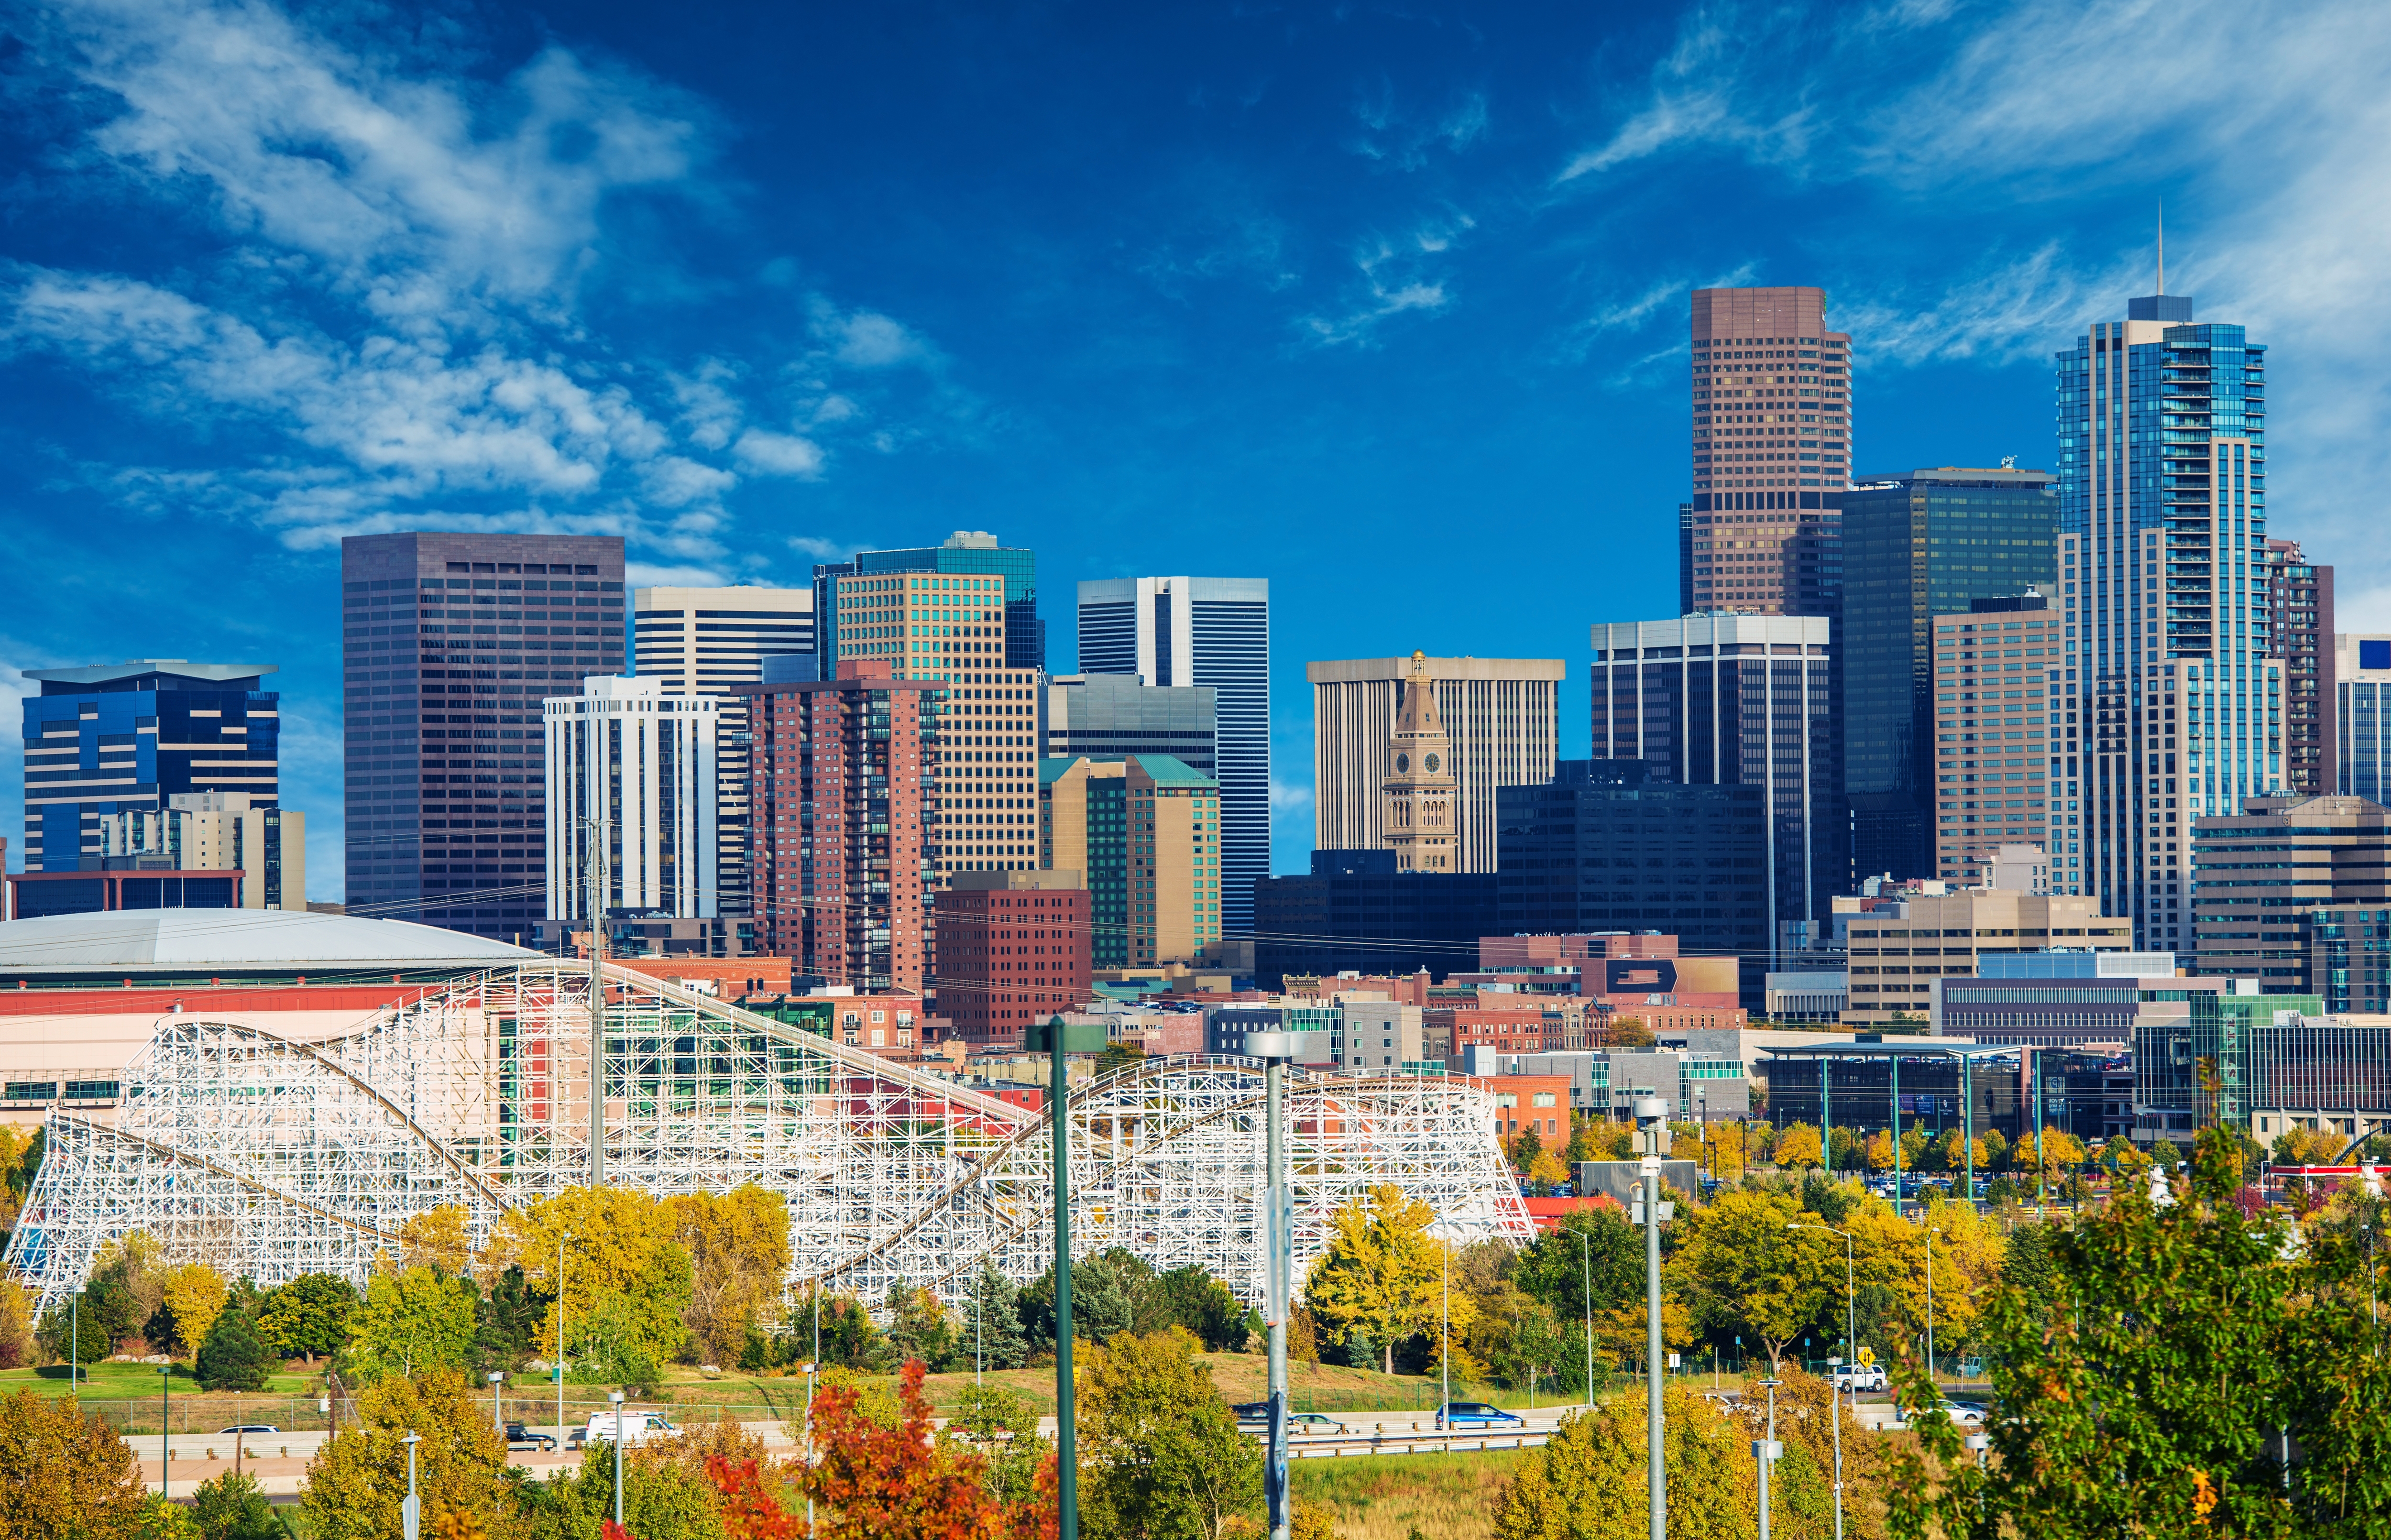 Sunny Day in Denver Colorado United States. Downtown Denver City Skyline and the Blue Sky.